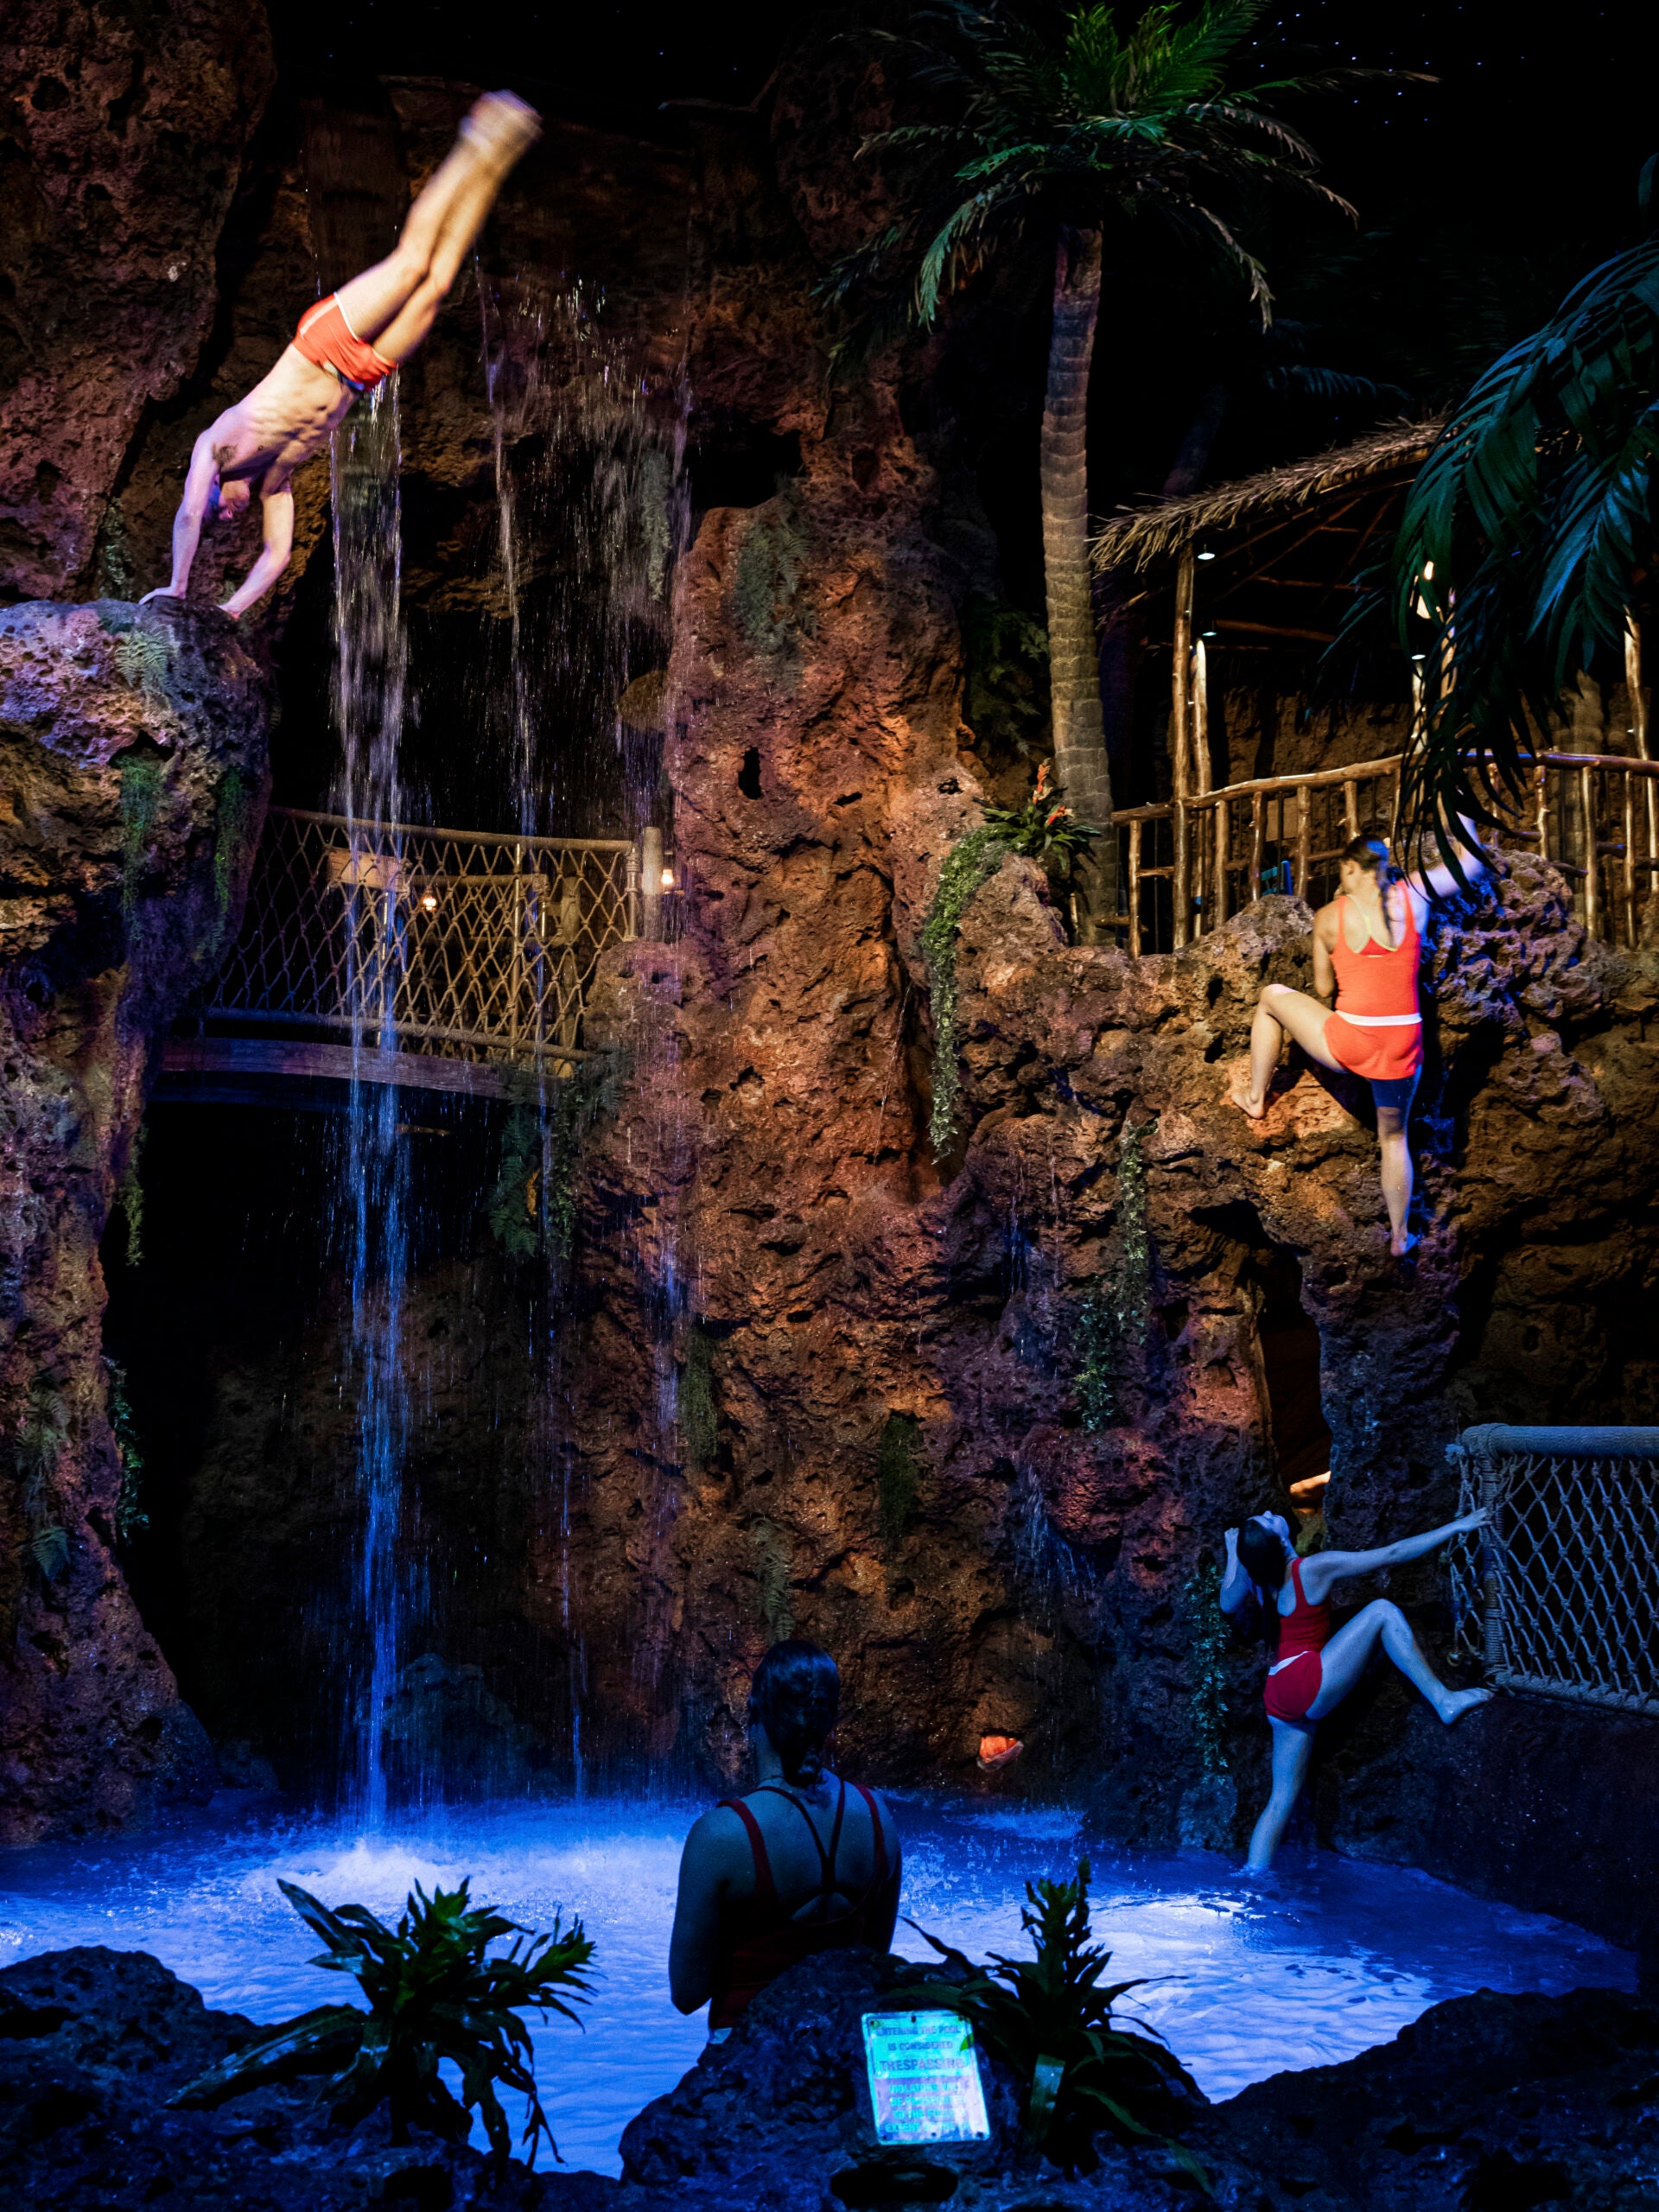 Cliff divers practice their routines in a renovated pool area at the refurbished Casa Bonita in Lakewood, Colo.